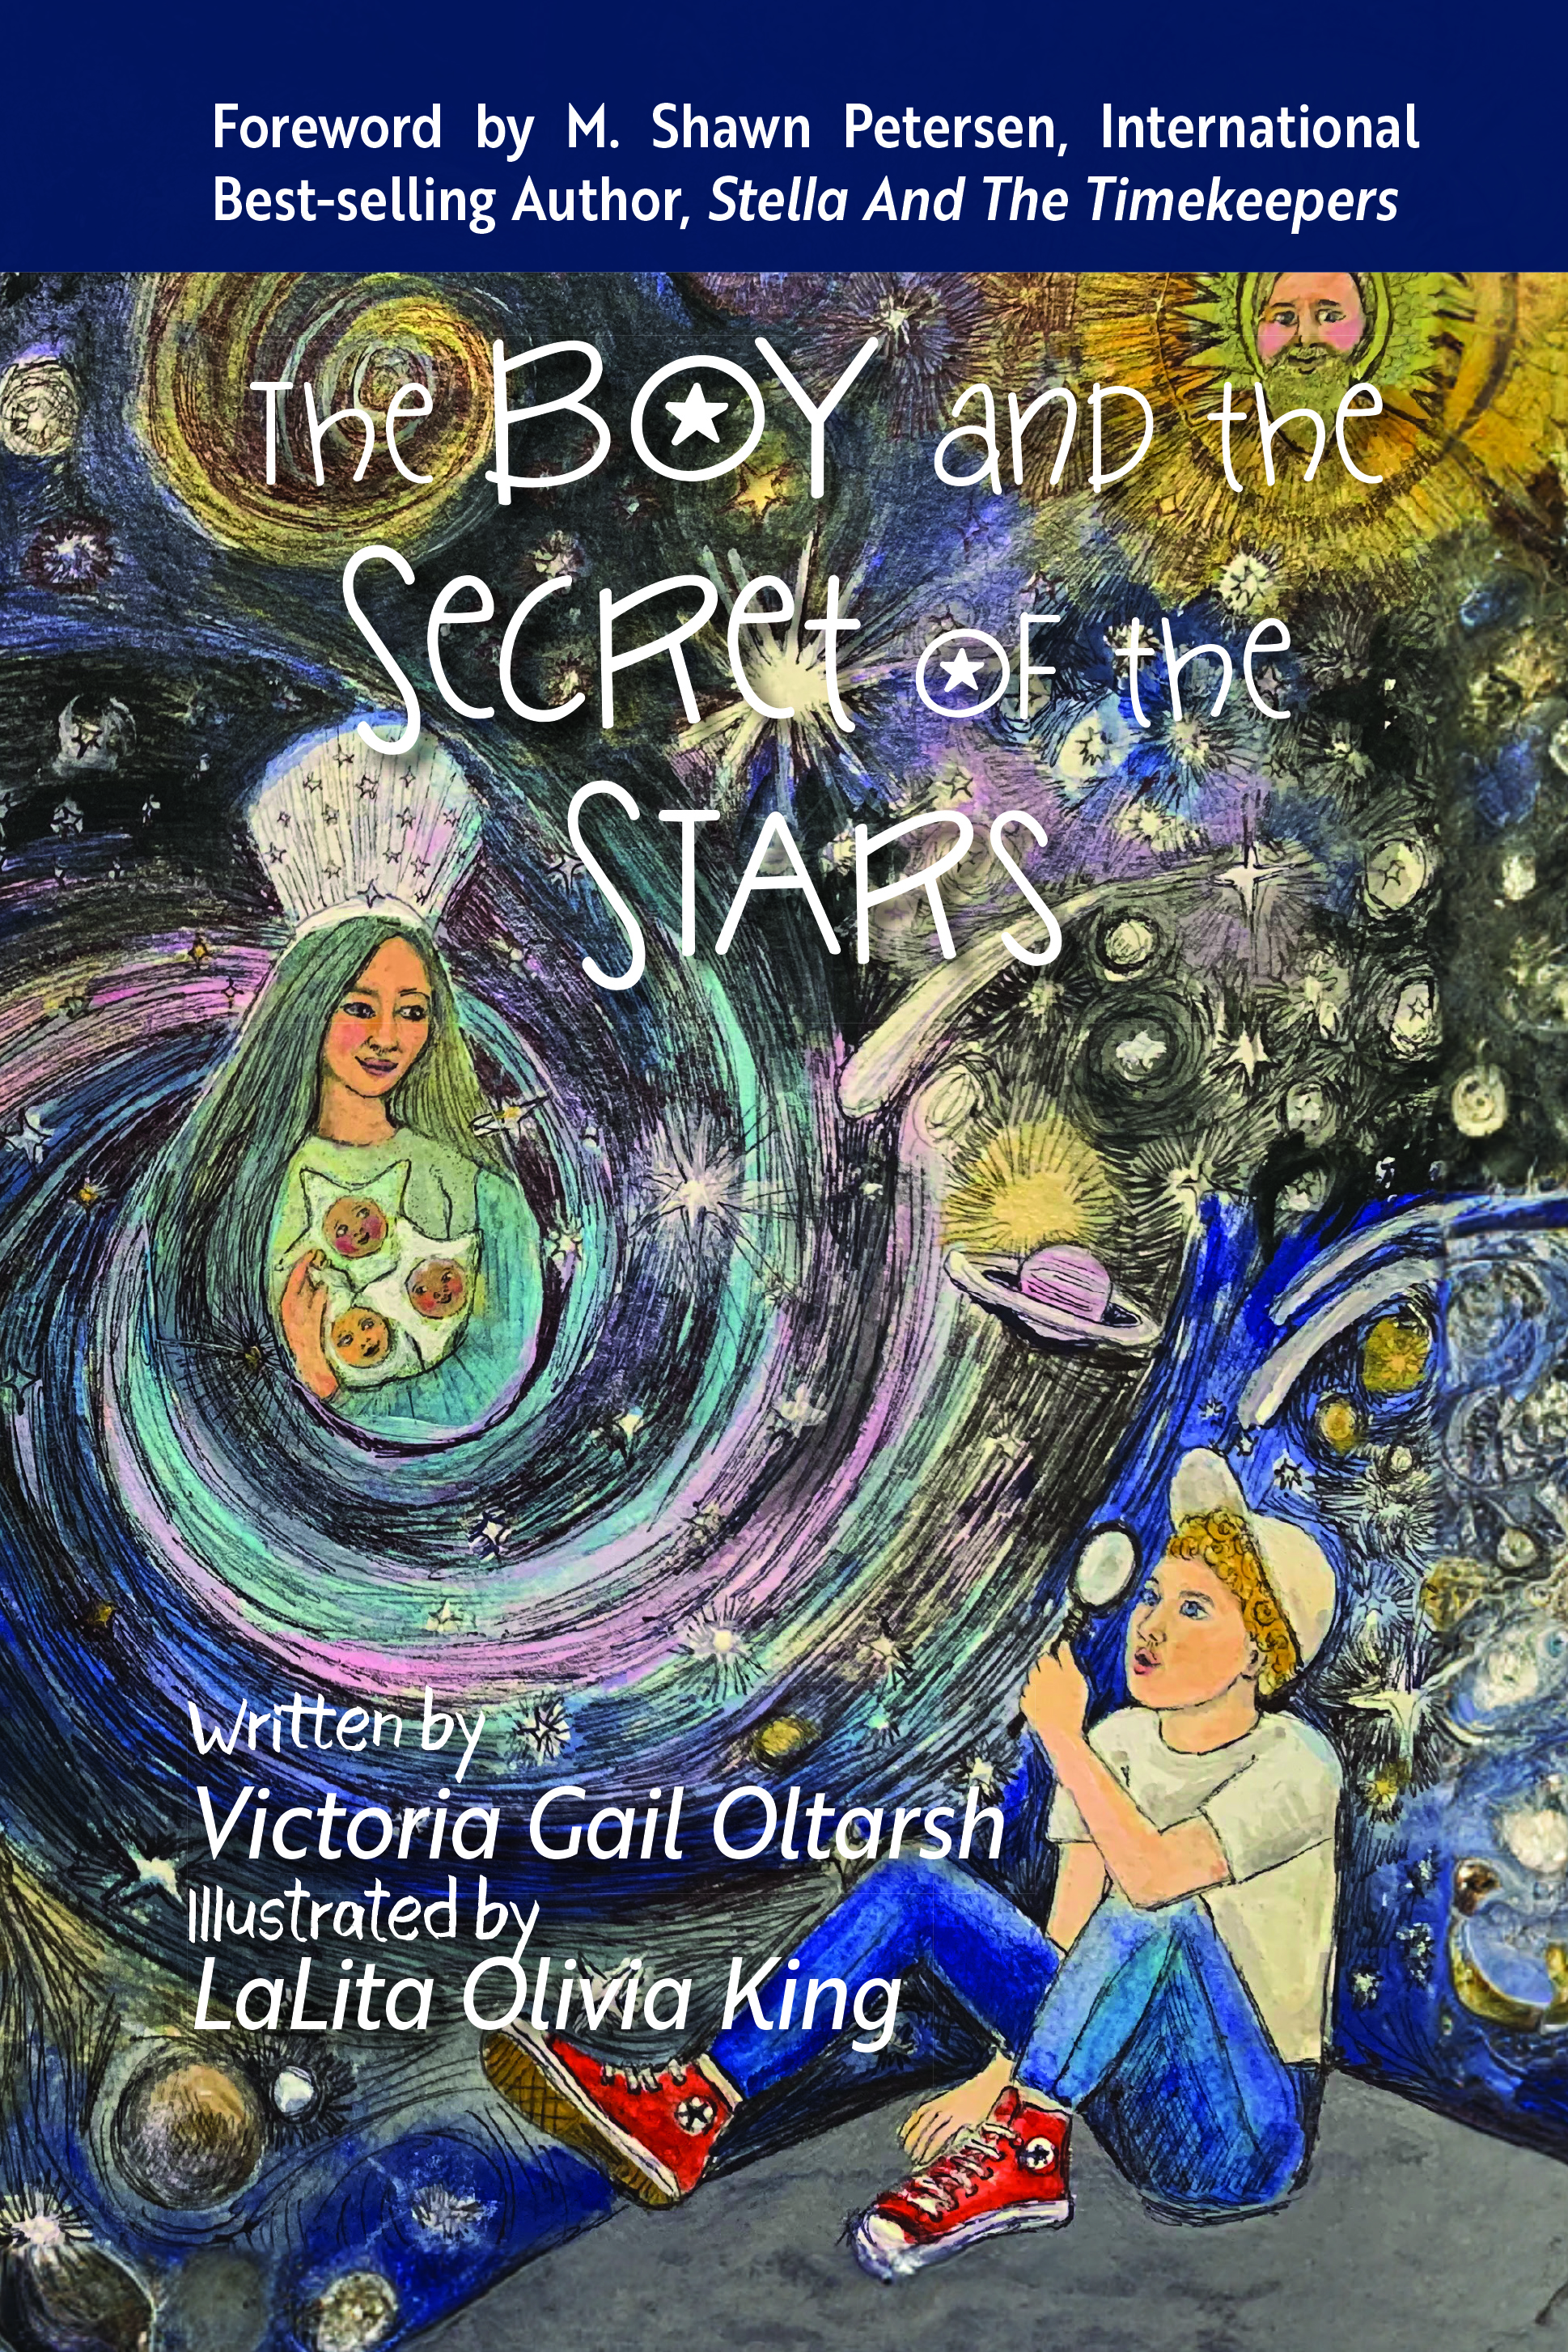 The Boy and the Secret of the Stars by Victoria Gail Oltarsh